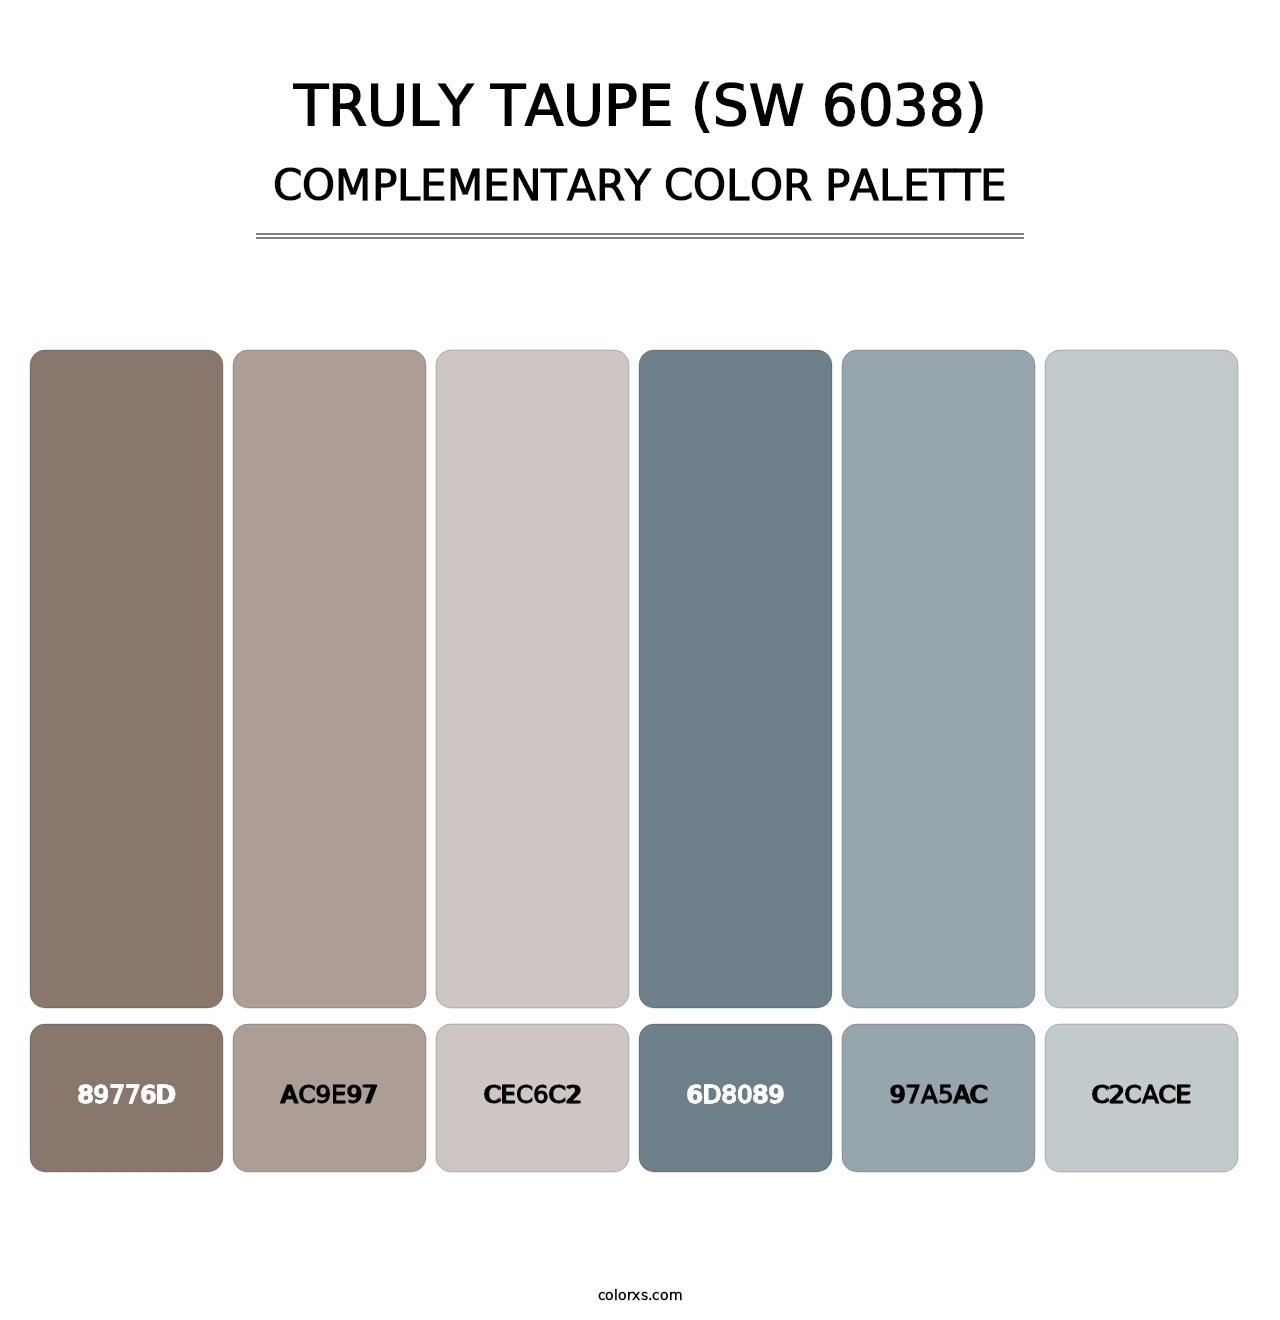 Truly Taupe (SW 6038) - Complementary Color Palette